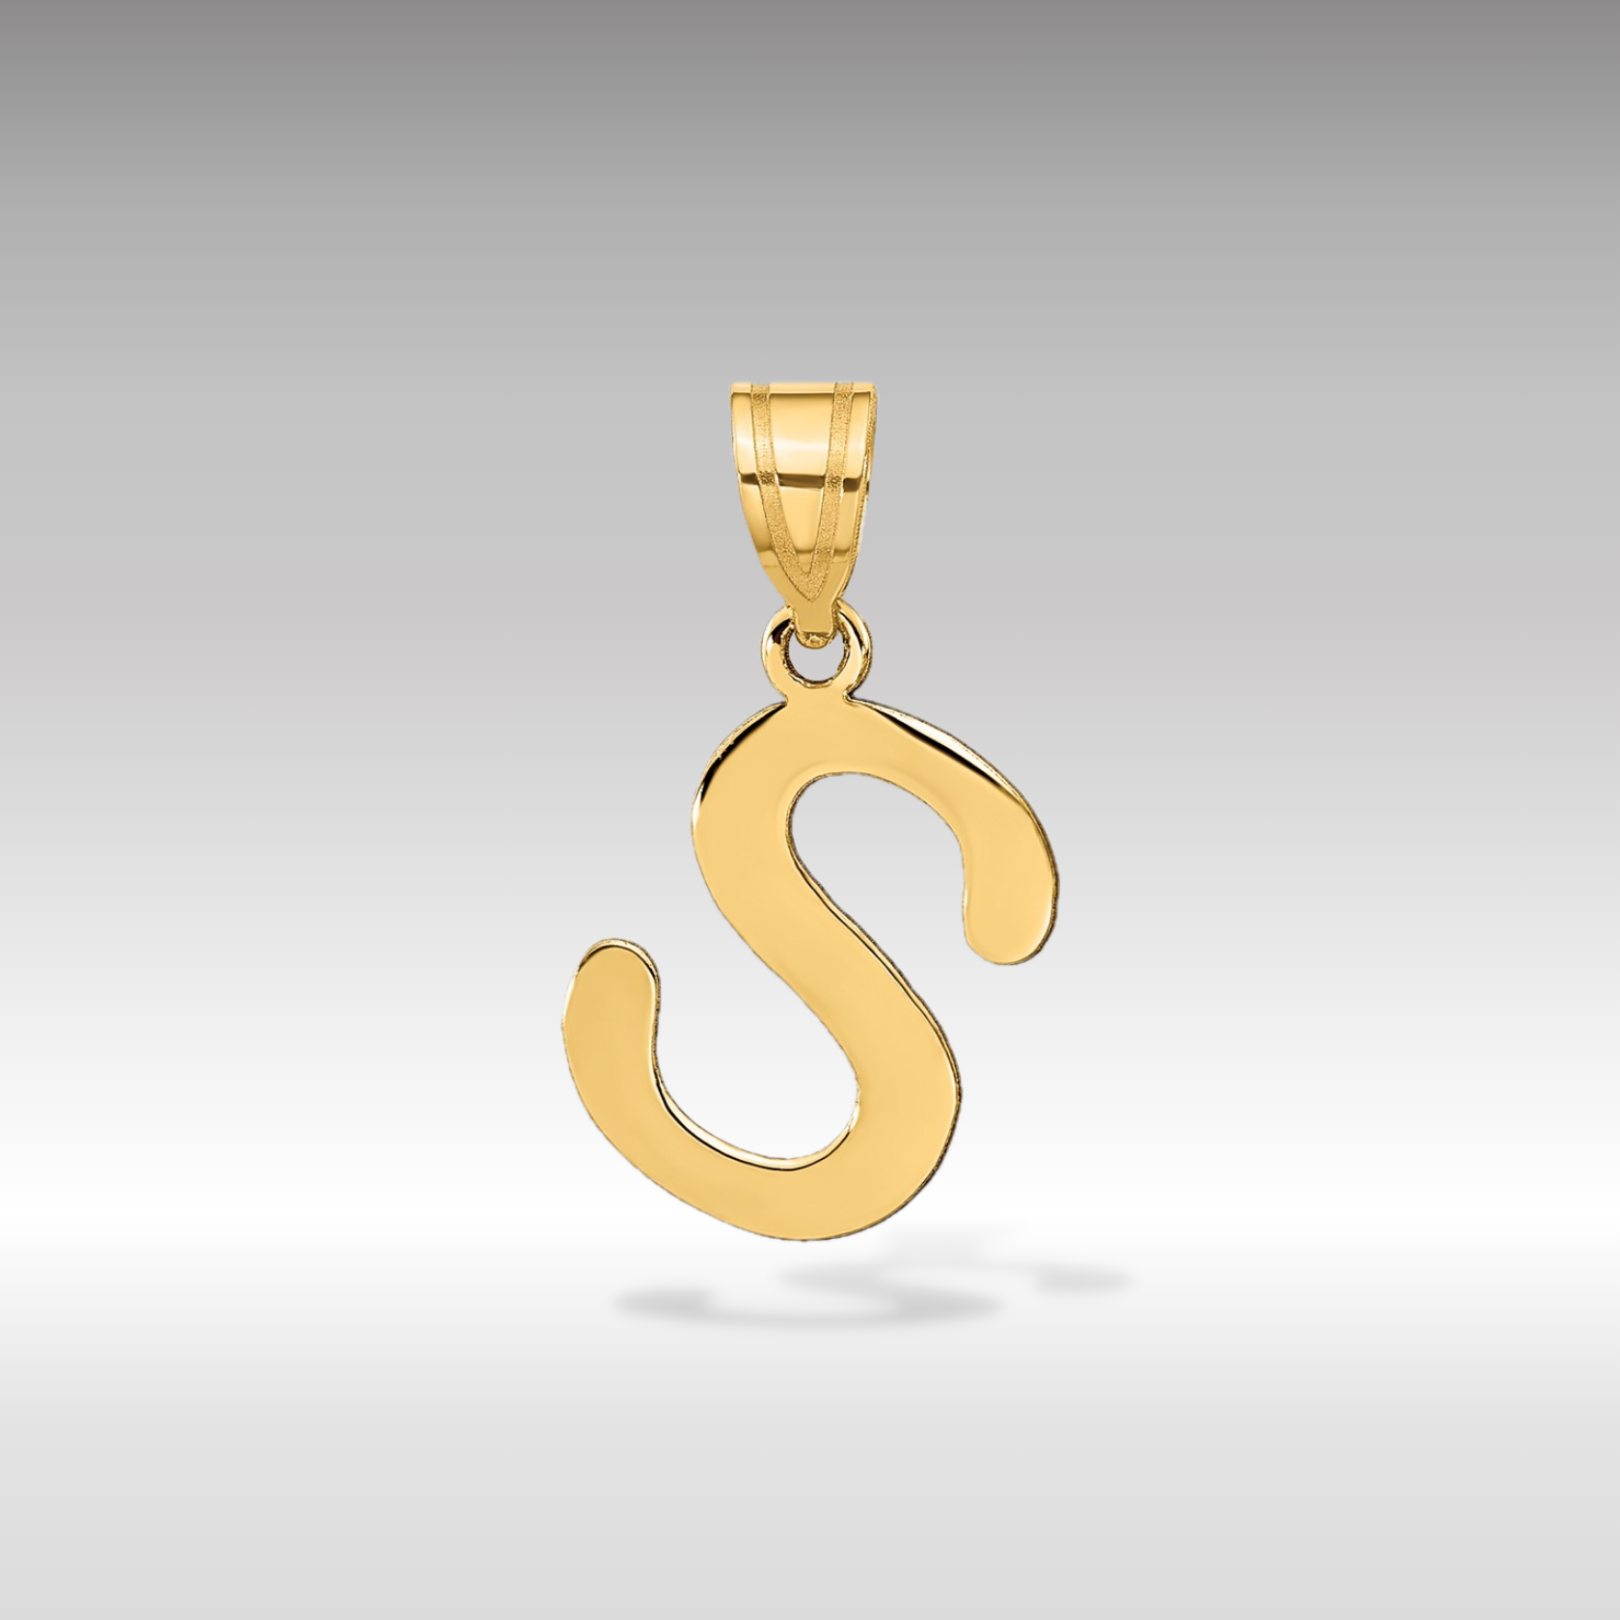 14k Gold Polished Letter 'S' Initial Charm - Charlie & Co. Jewelry